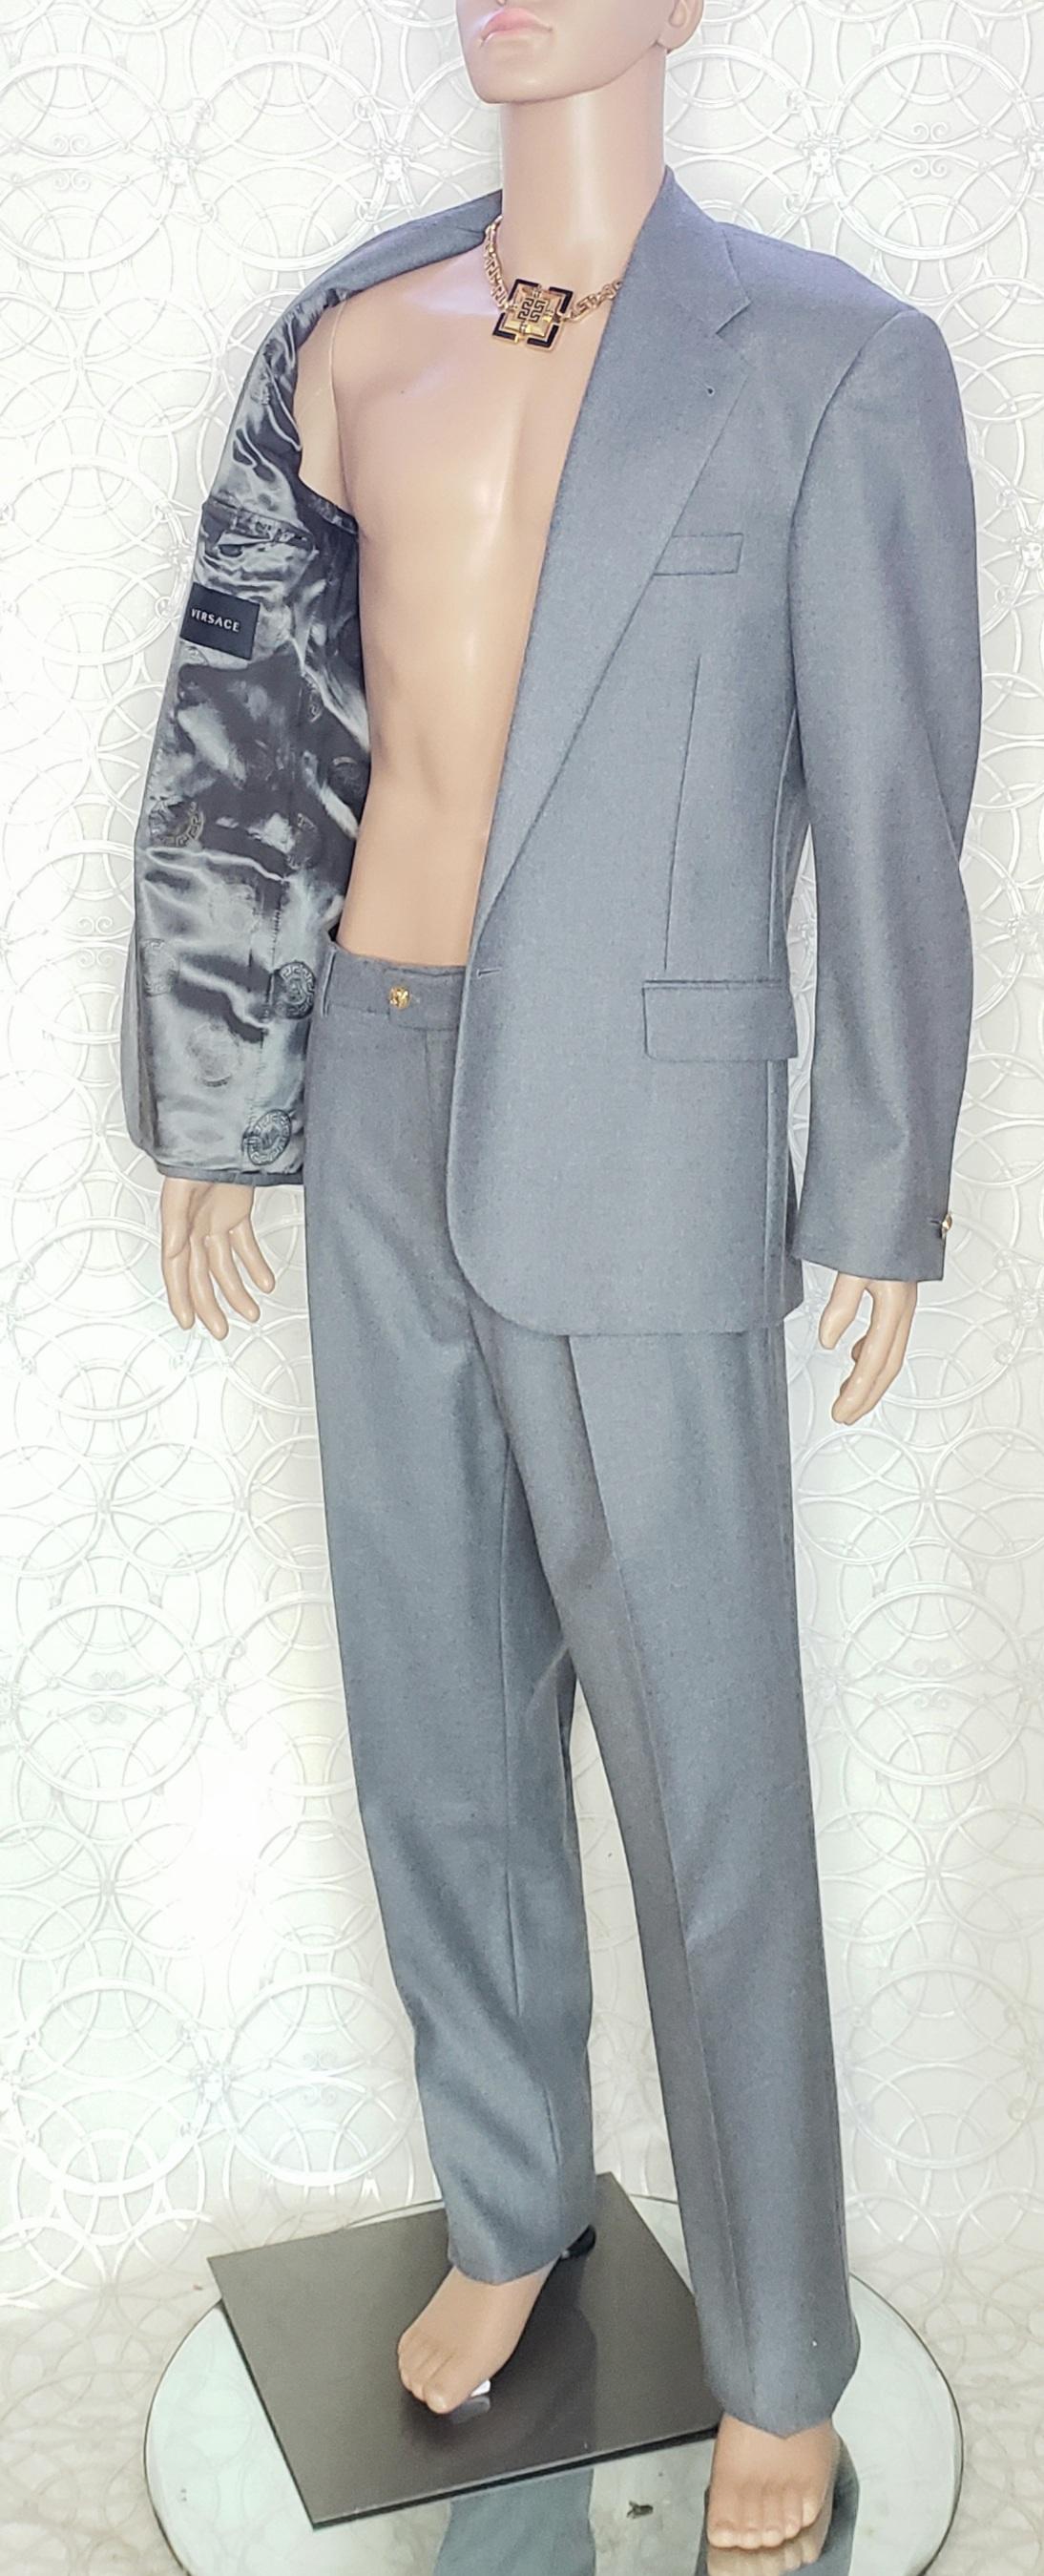 VERSACE F/W 2013 look # 45 BRAND NEW GRAY WOOL SUIT 48 - 38 (M) For Sale 4